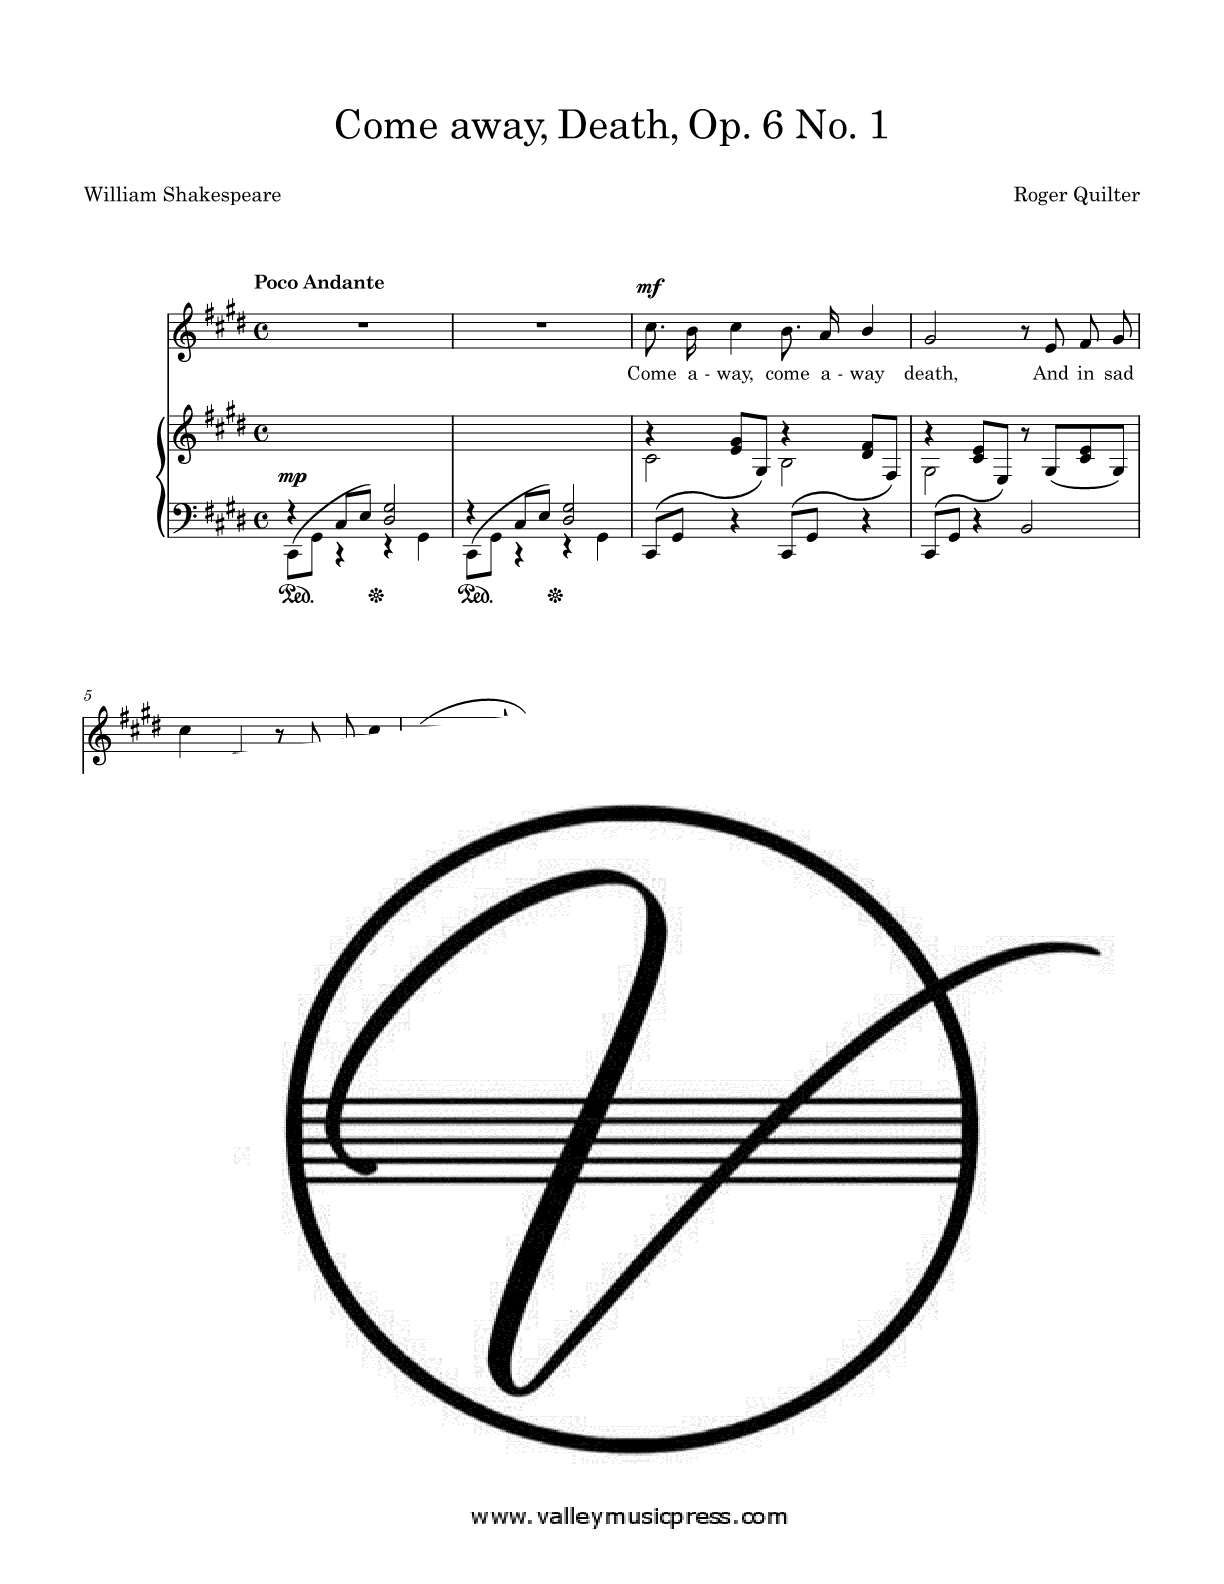 Quilter - Come away, Death Op. 6 No. 1 (Voice) - Click Image to Close